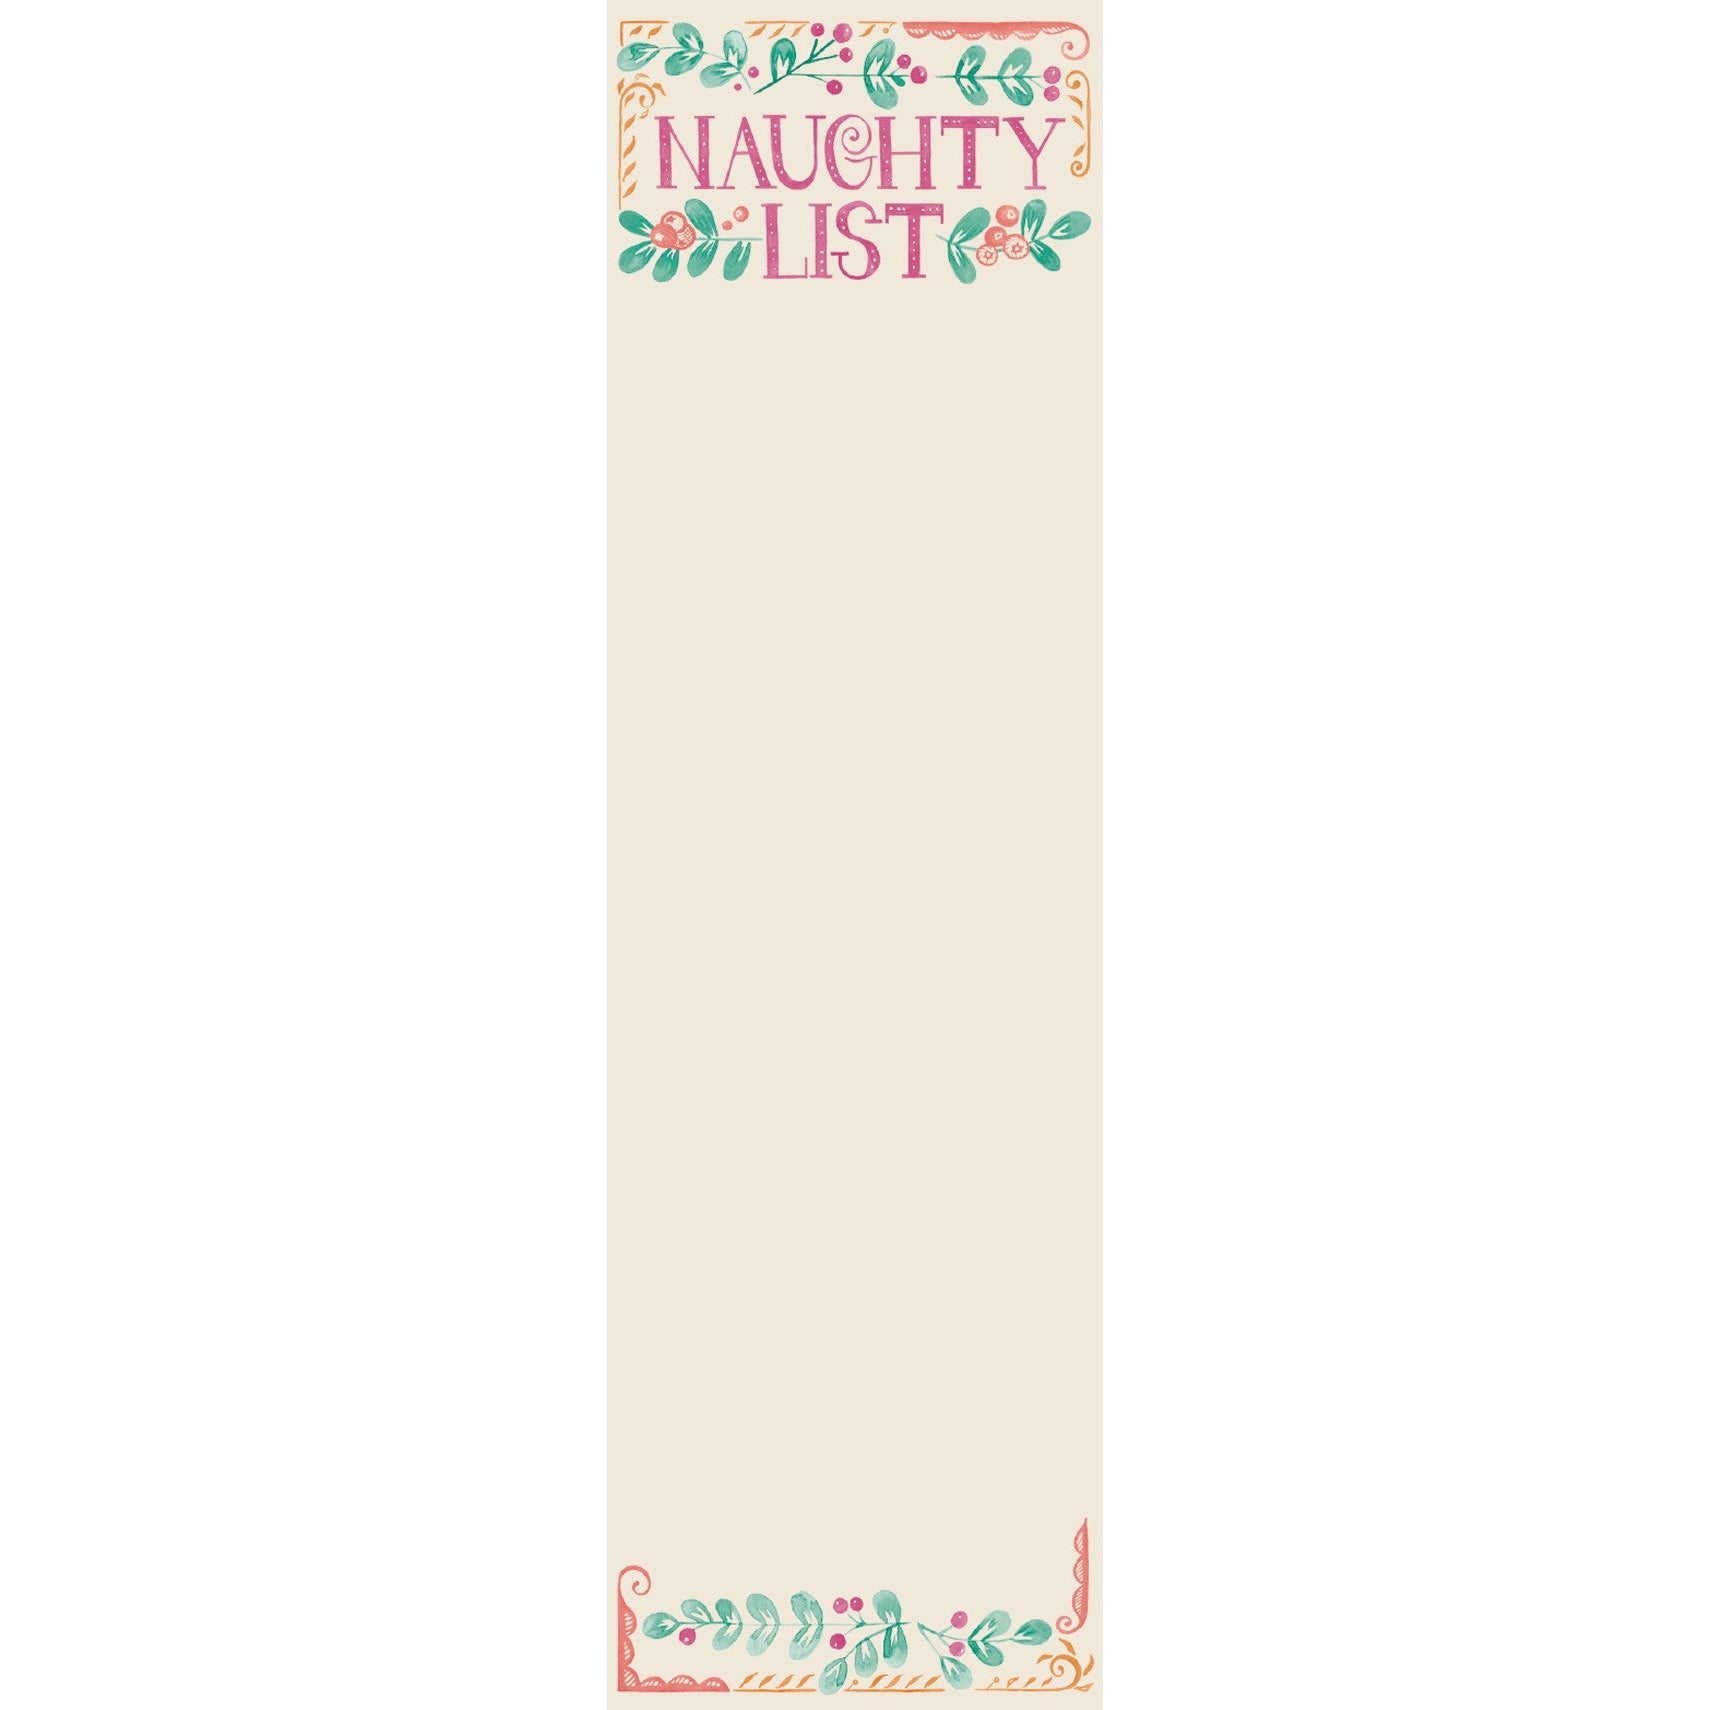 Naughty List Magnetic Holiday Notepad | 9.5" x 2.75" | Holds to Fridge with Strong Magnet